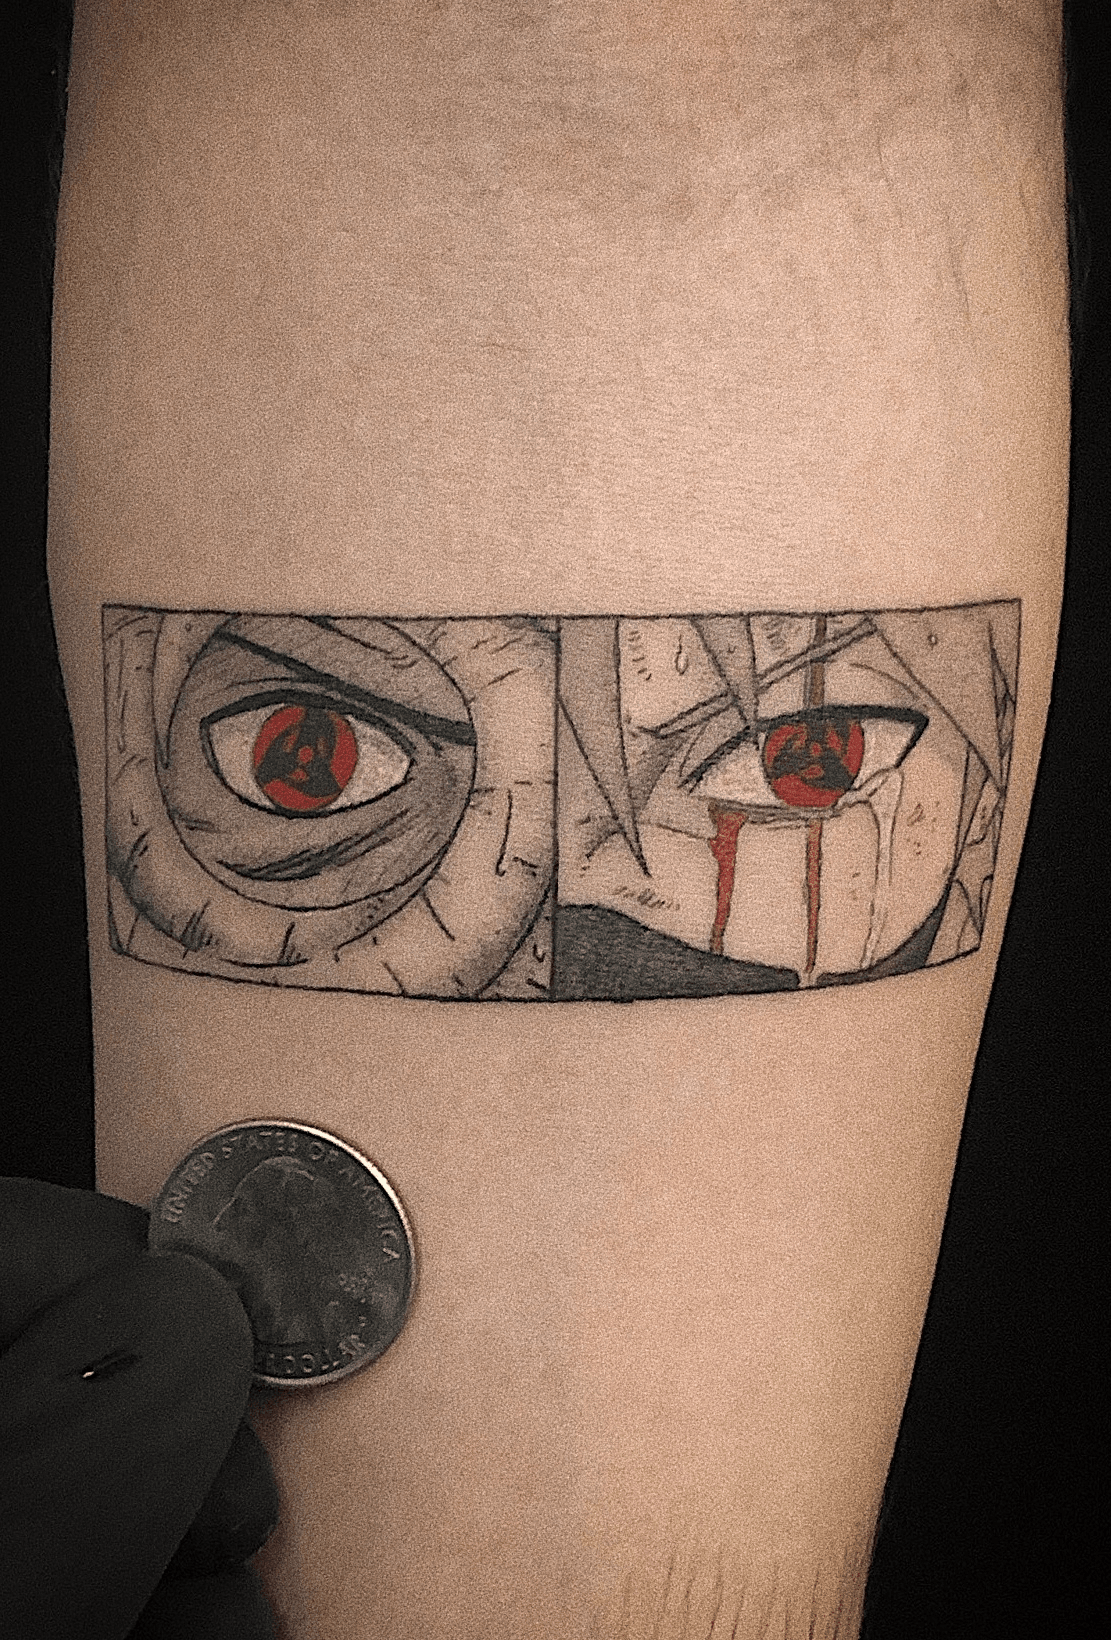 Pin by JHEY Ferreira on Tatuagens | Naruto tattoo, Anime tattoos, Tattoo  designs and meanings